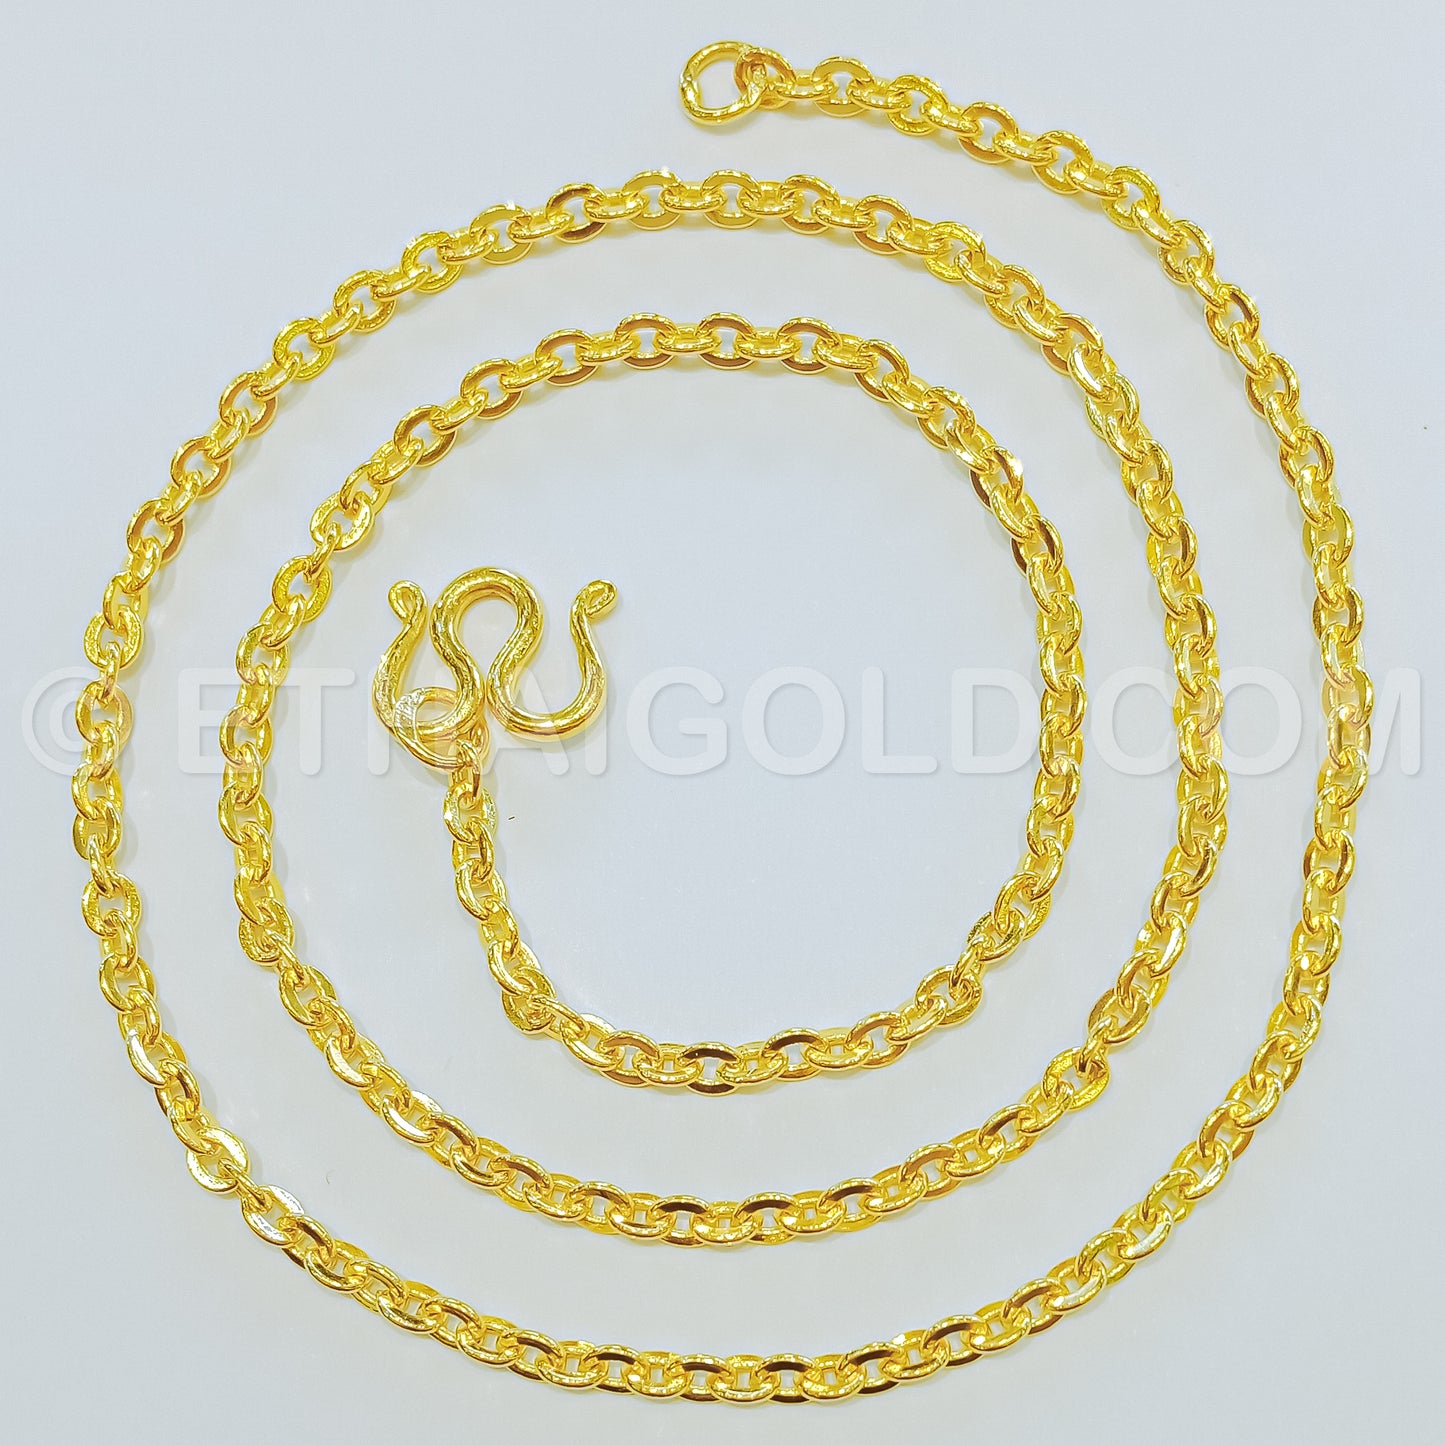 3 BAHT POLISHED SOLID FLAT CABLE CHAIN NECKLACE IN 23K GOLD (ID: N0203B)